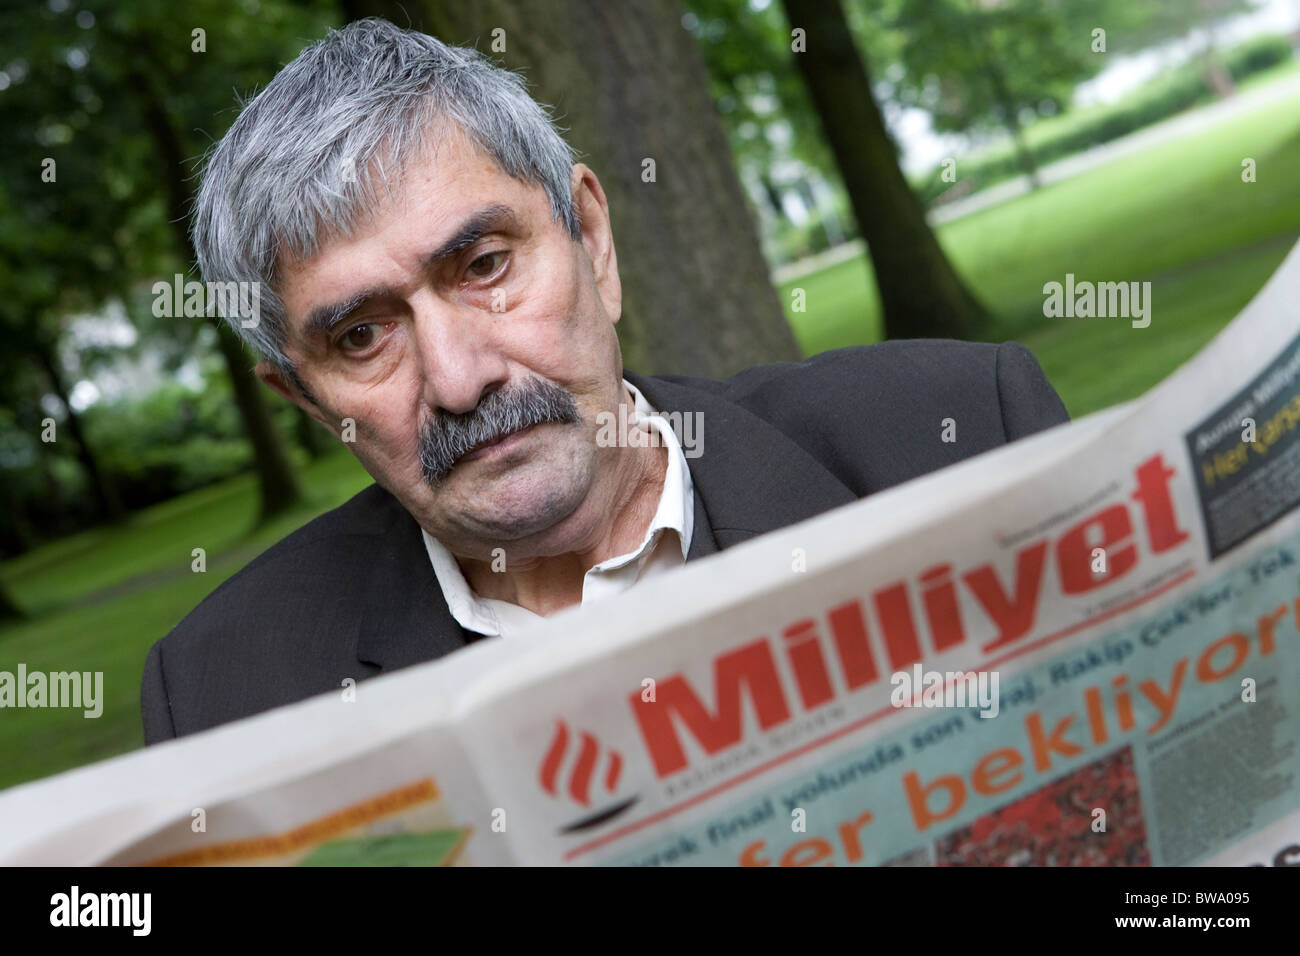 Older turkish man reads a newspaper, Herne, Germany Stock Photo